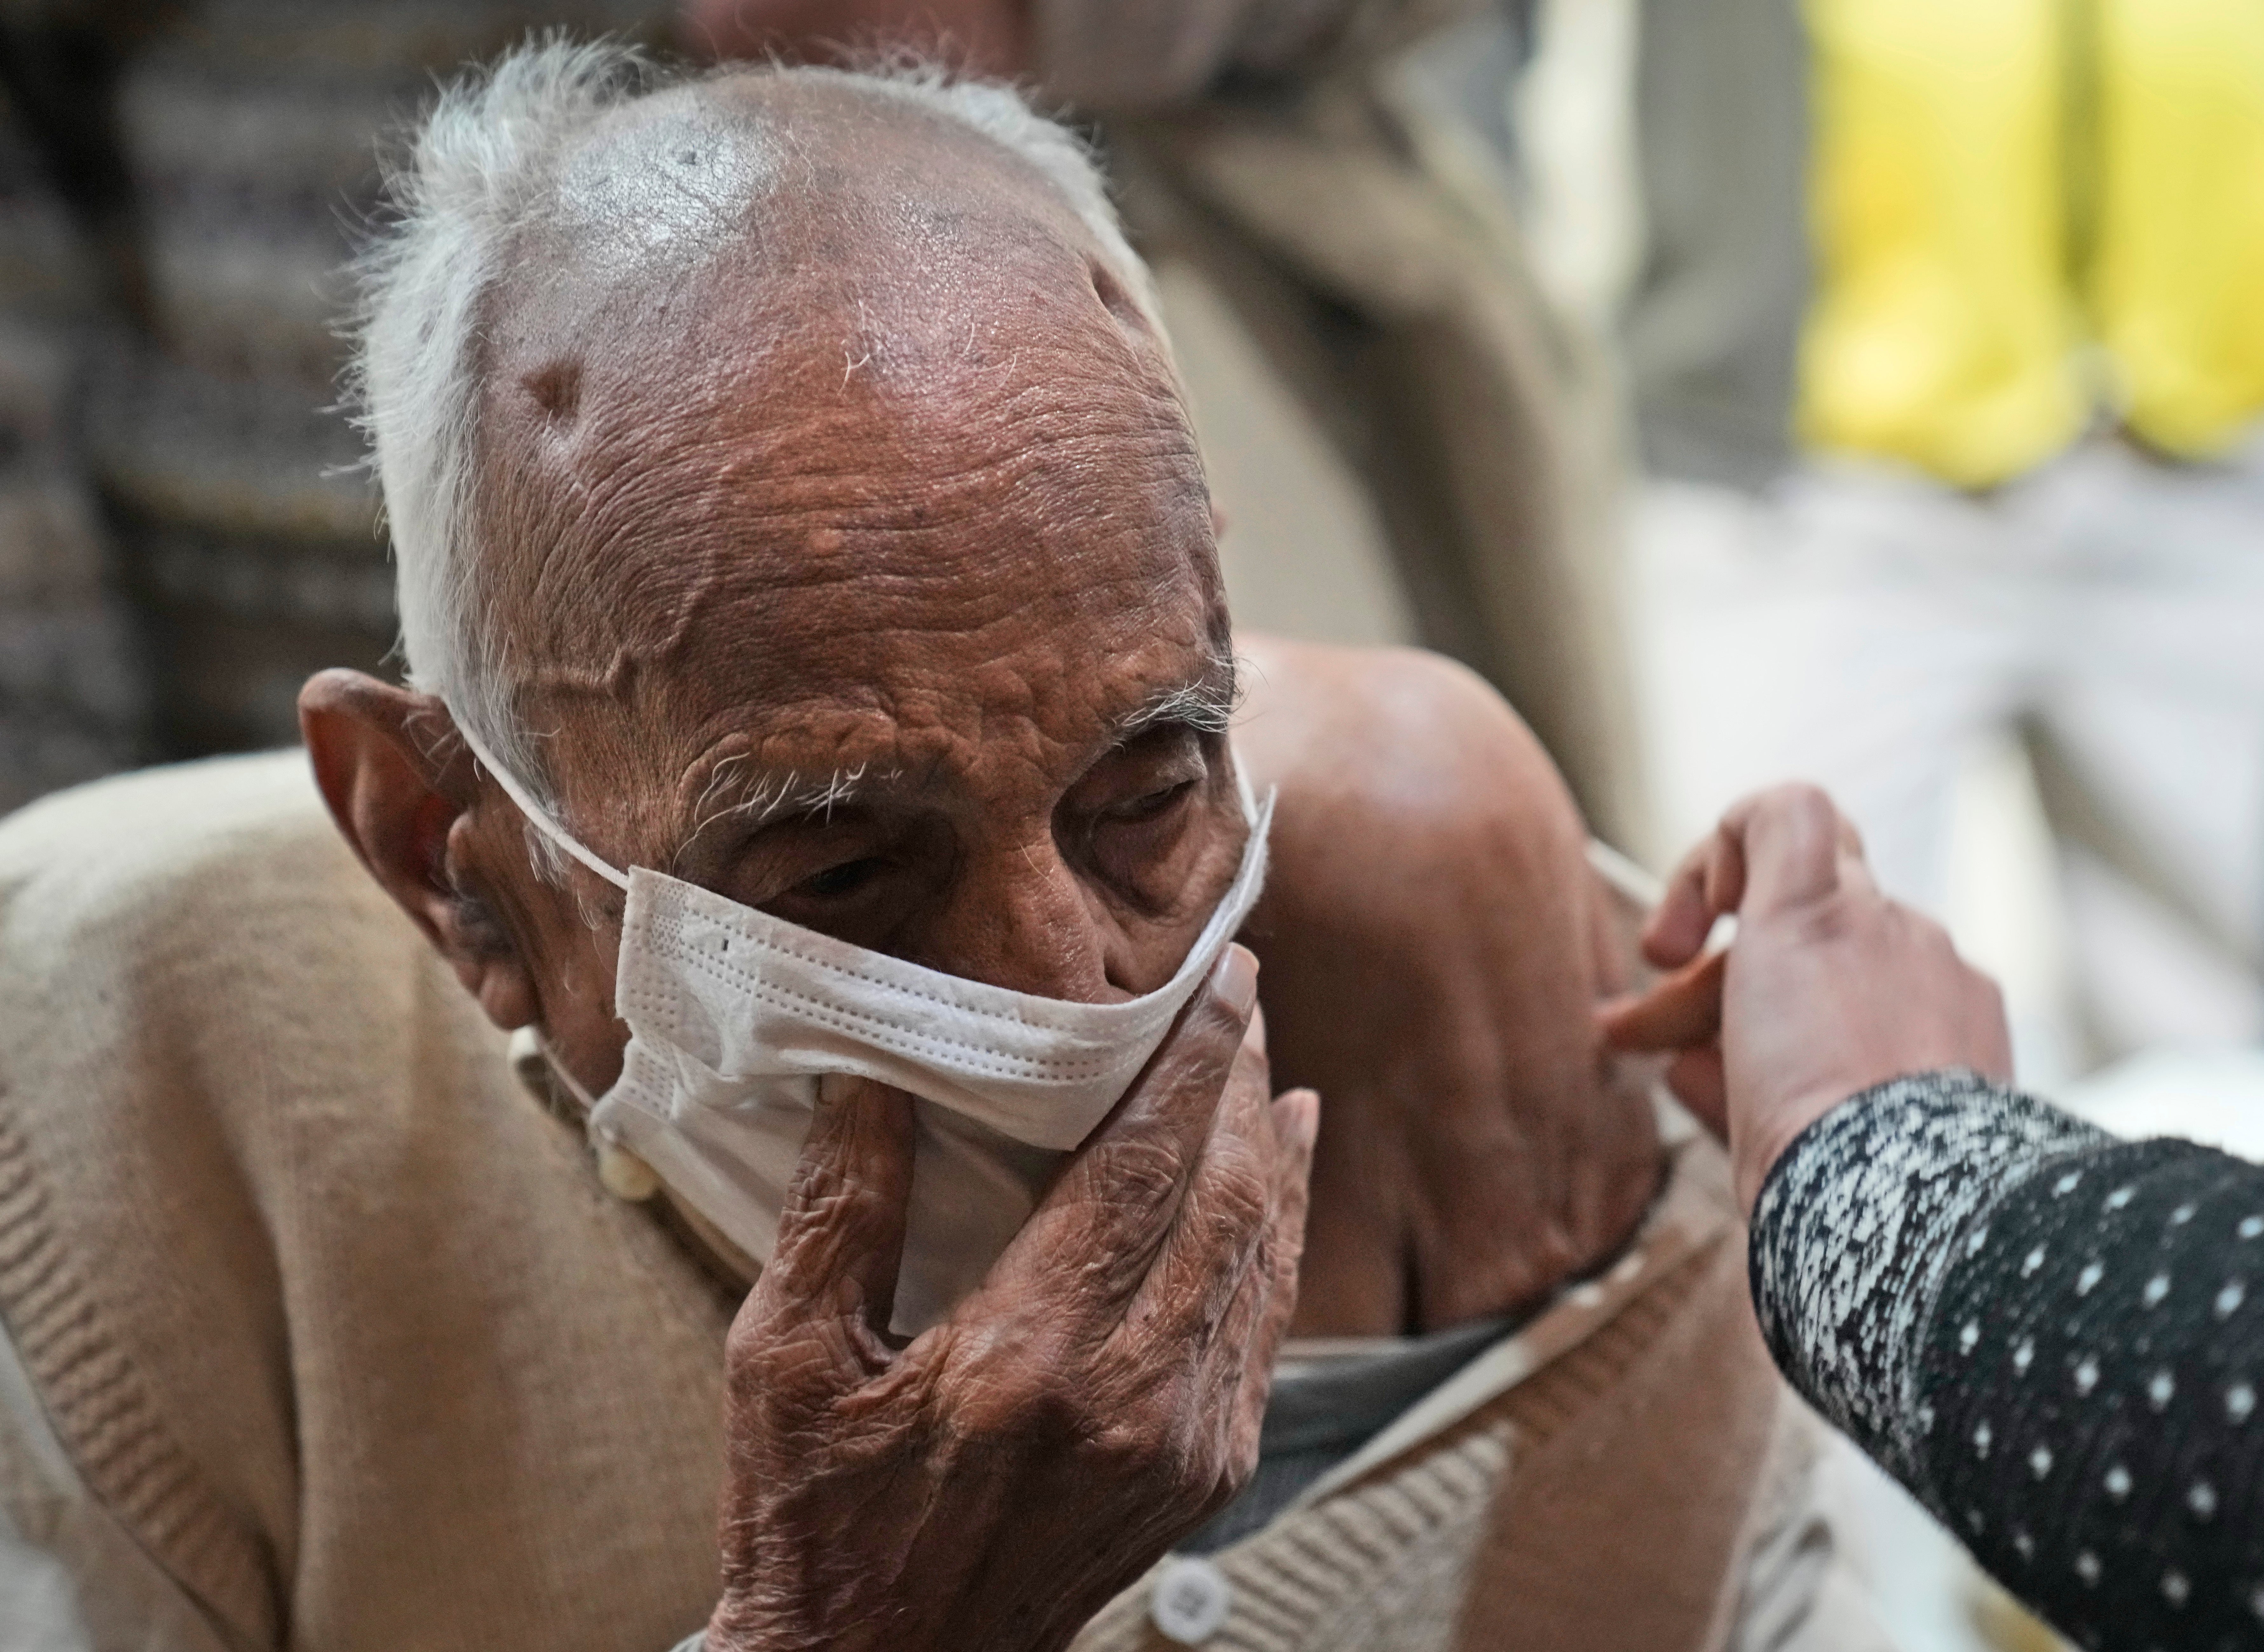 An elderly man receives a Covid vaccination at a makeshift centre in a government school in New Delhi, India on 28 January 2022